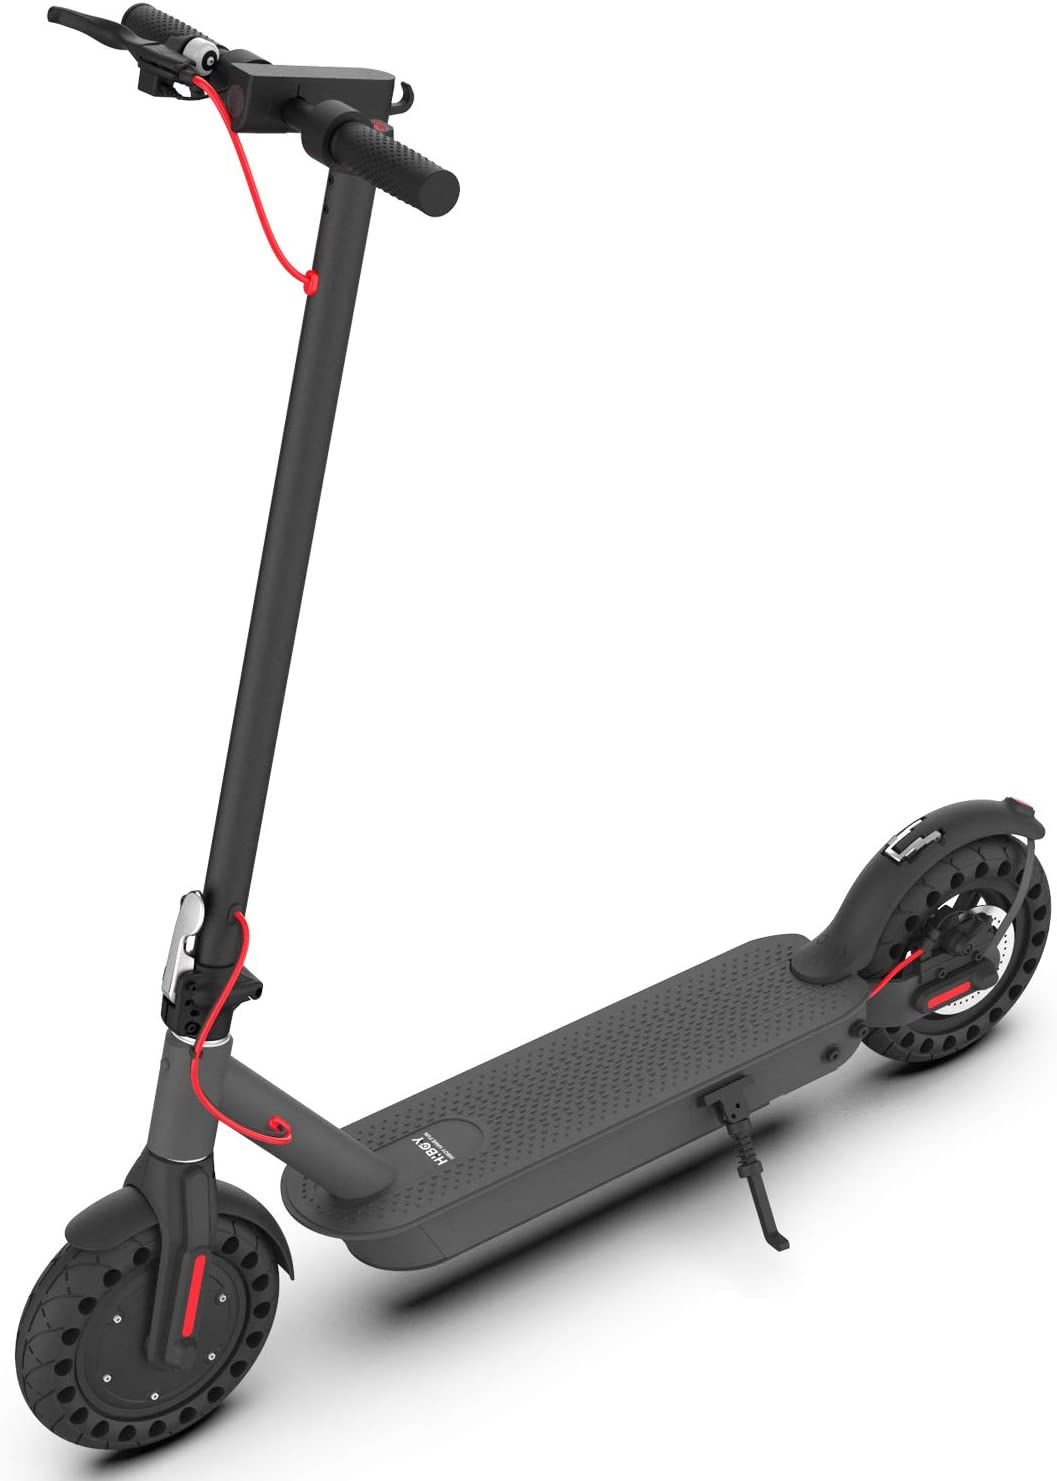 Hiboy S2 Pro Folding Electric Scooter